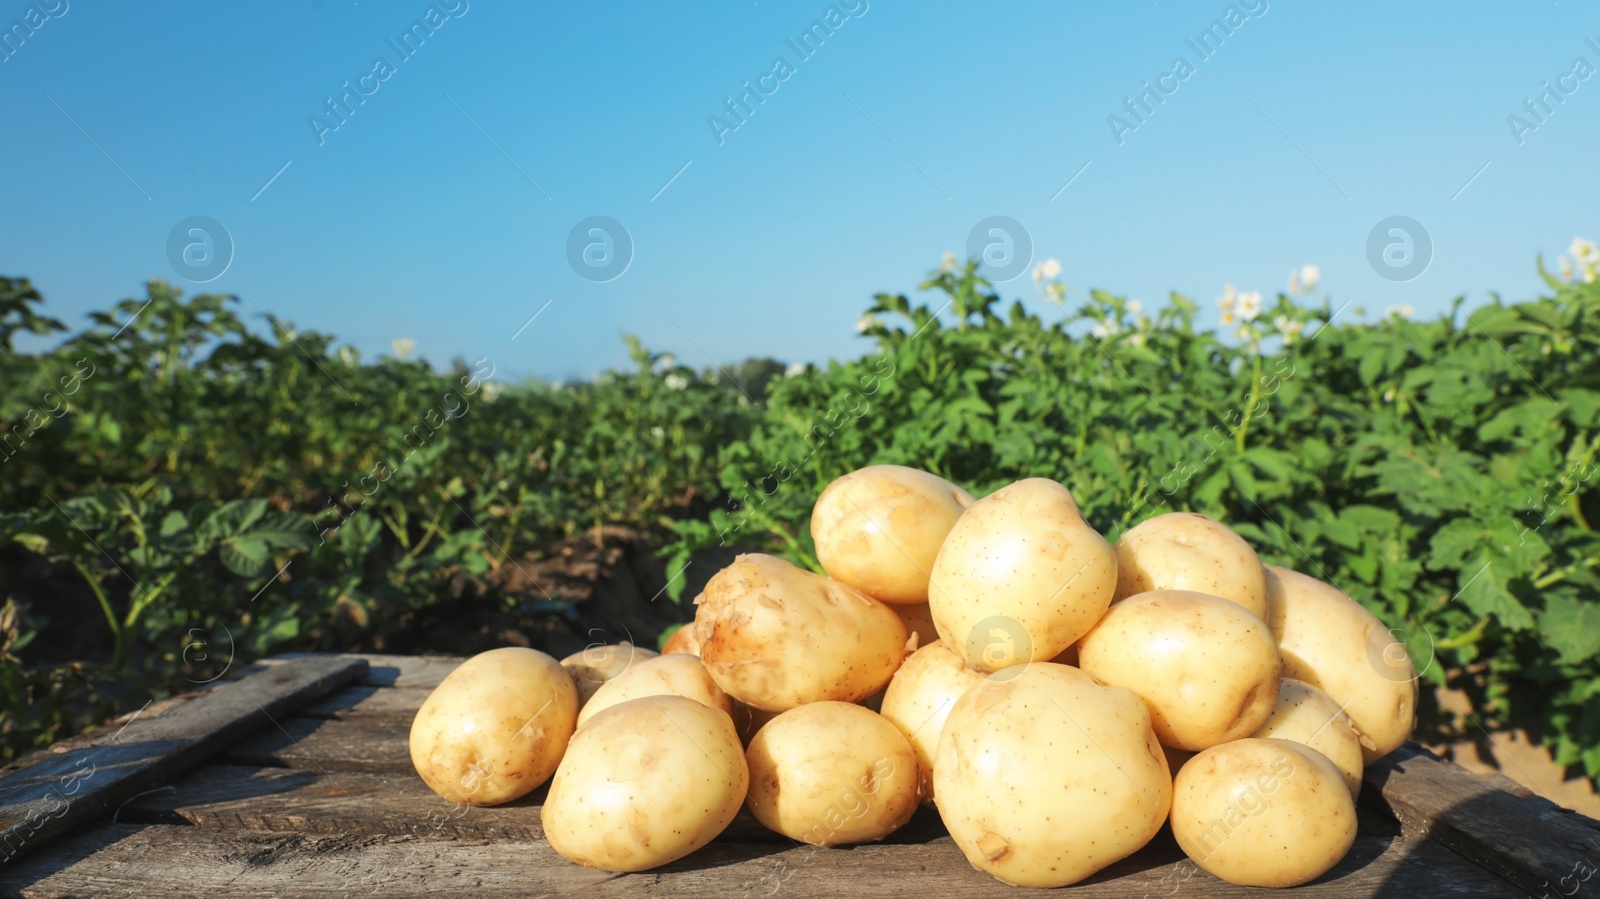 Photo of Wooden crate with raw young potatoes in field on summer day